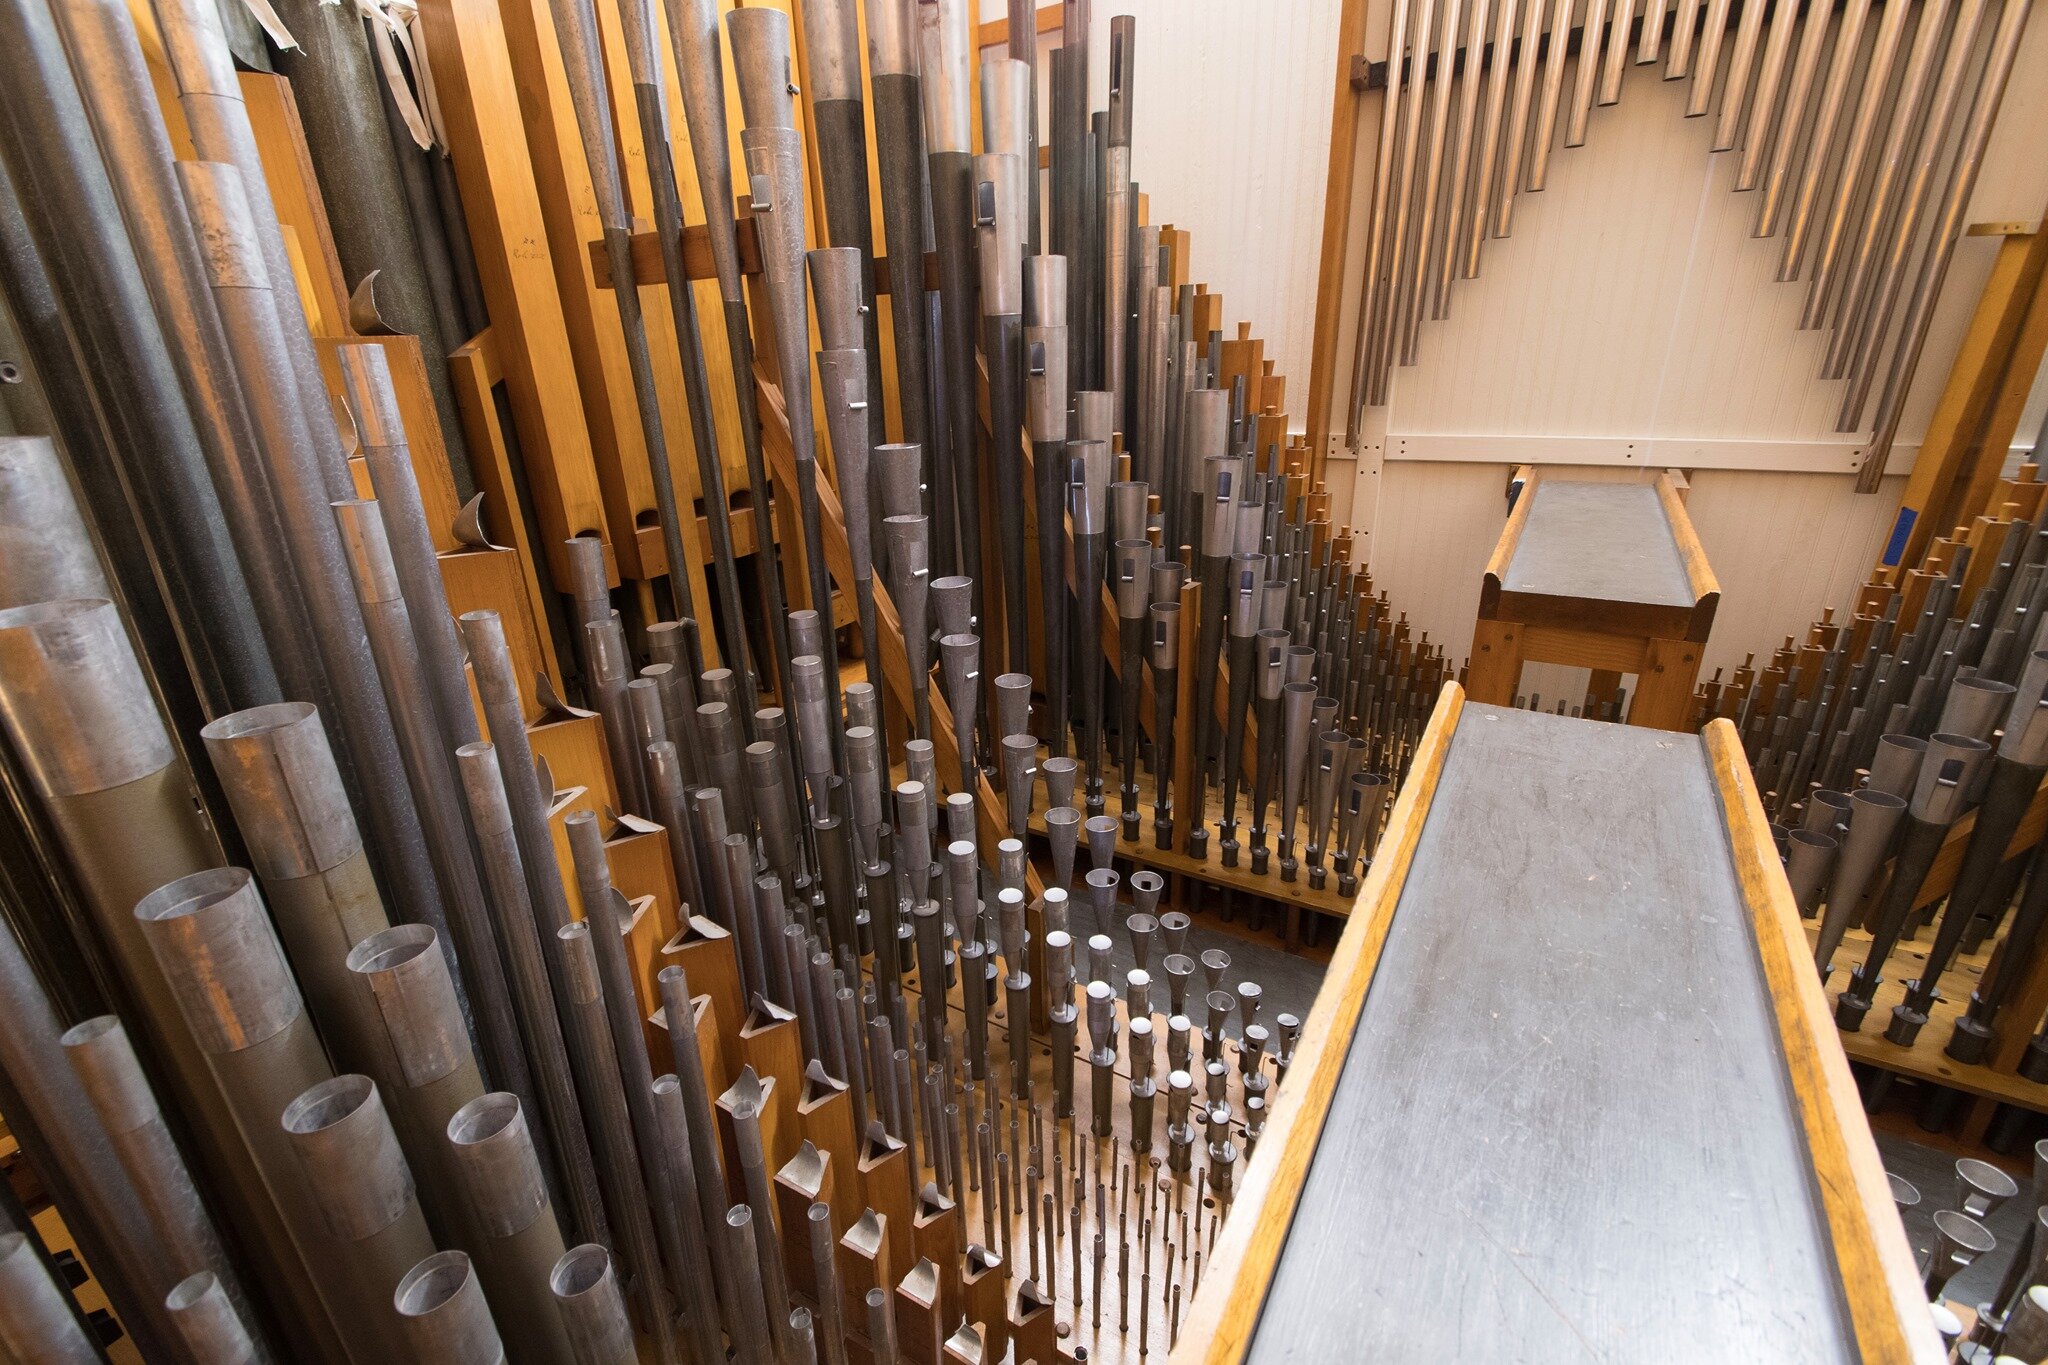 Full cleaning of the pipe organ chambers